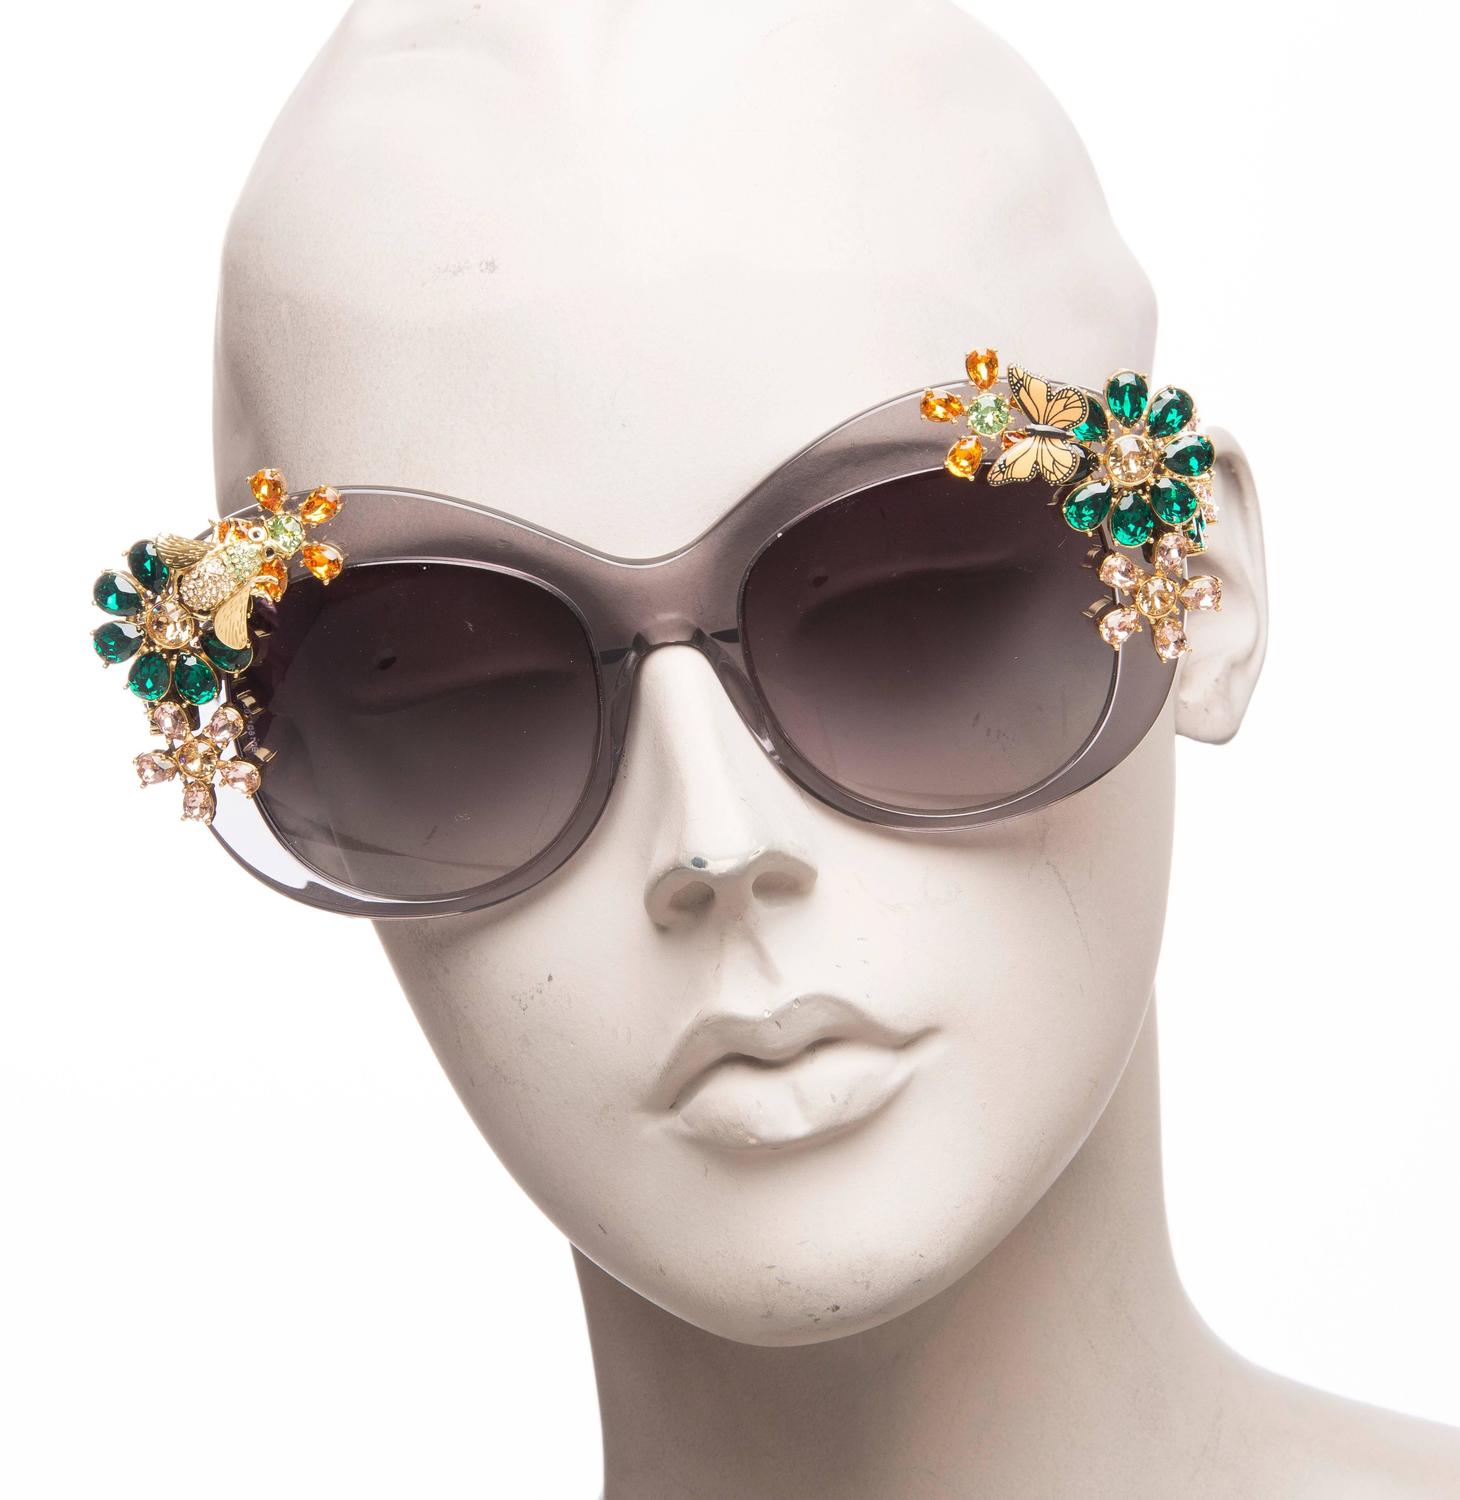 Dolce and Gabbana Enchanted Beauties Collection Sunglasses, Spring - Summer  2015 at 1stDibs | dolce and gabbana sunglasses 2016, dolce gabbana  sunglasses 2015, dolce and gabbana sunglasses 2015